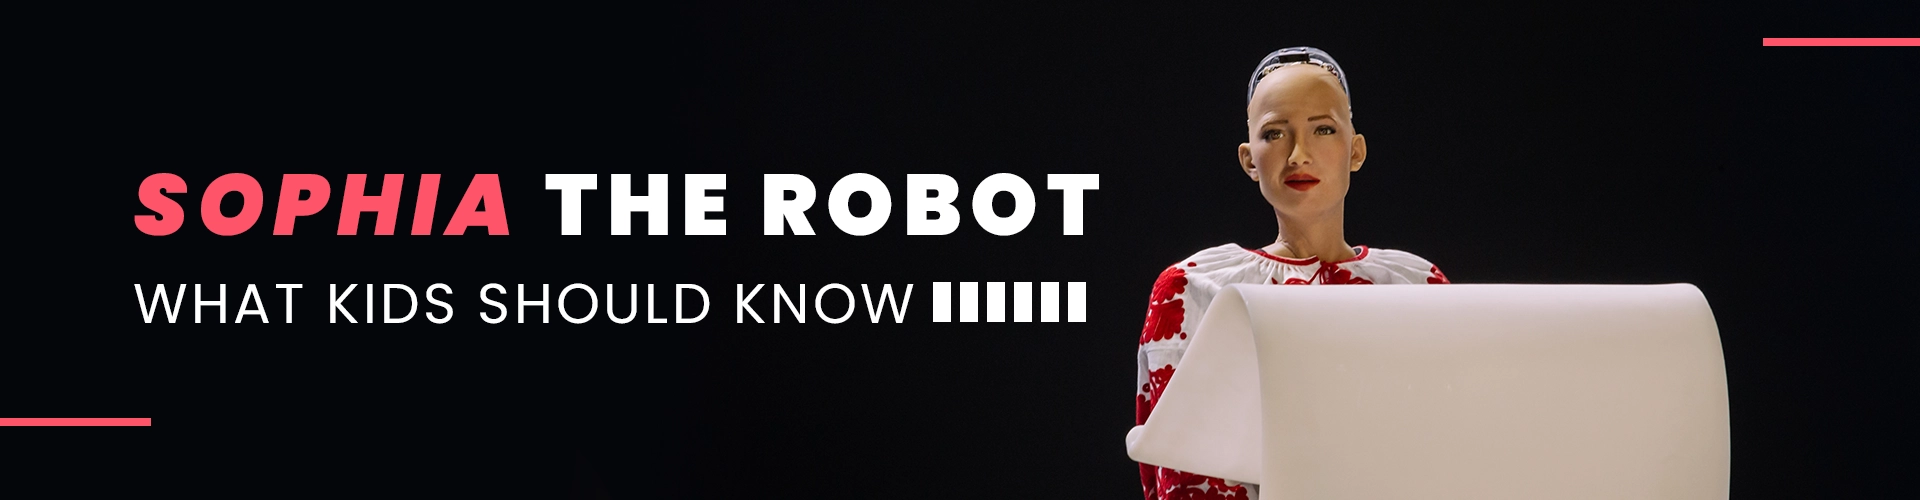 Sophia the Robot - What Kids Should Know